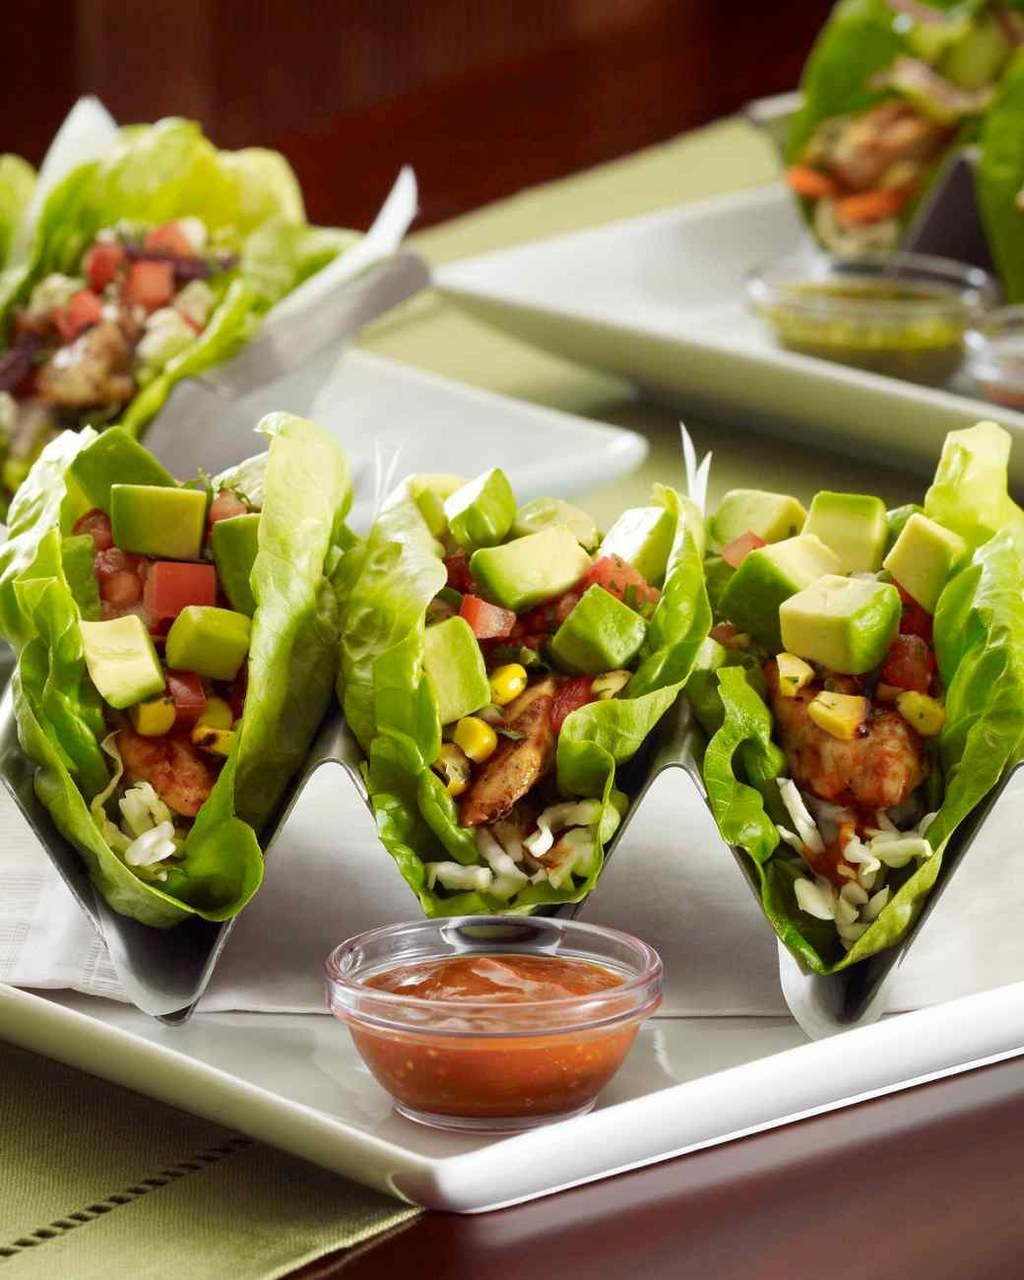 This recipe is actually straight from The Cheesecake Factory, and it'll please even the pickiest of taco lovers. Recipe: Mediterranean Chicken Lettuce Wrap Tacos